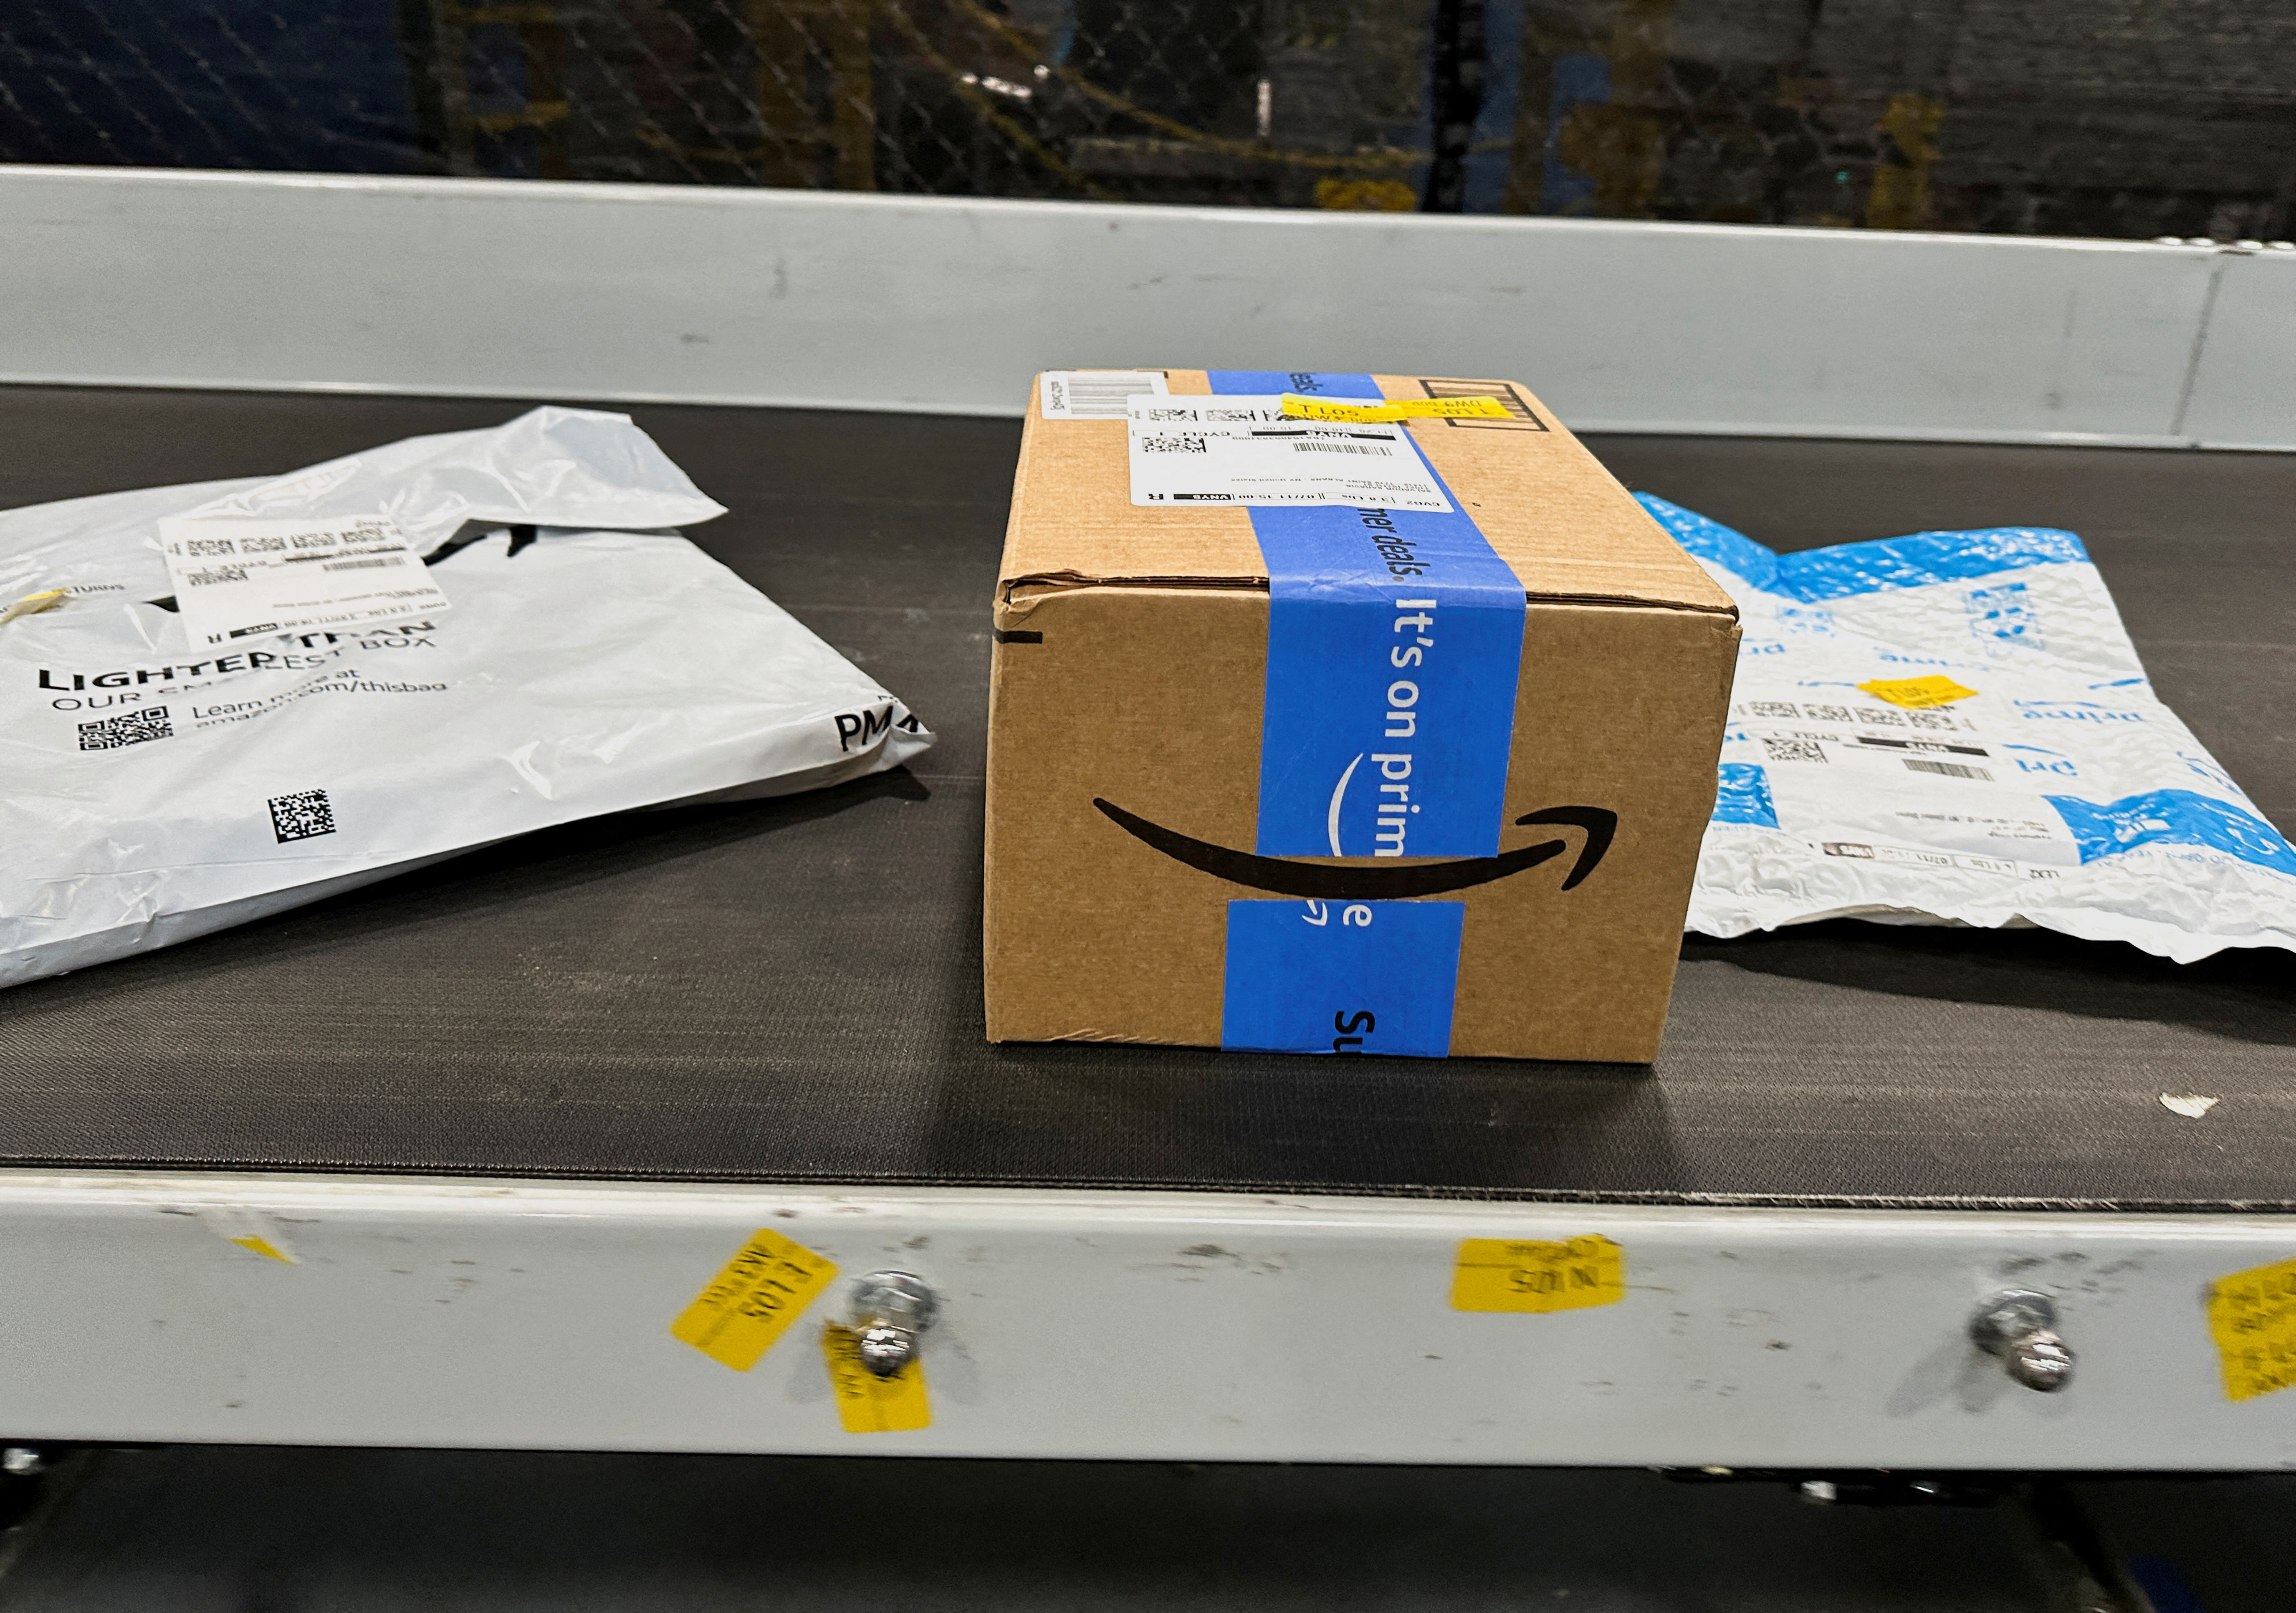 New York Amazon facility busy on Prime Day